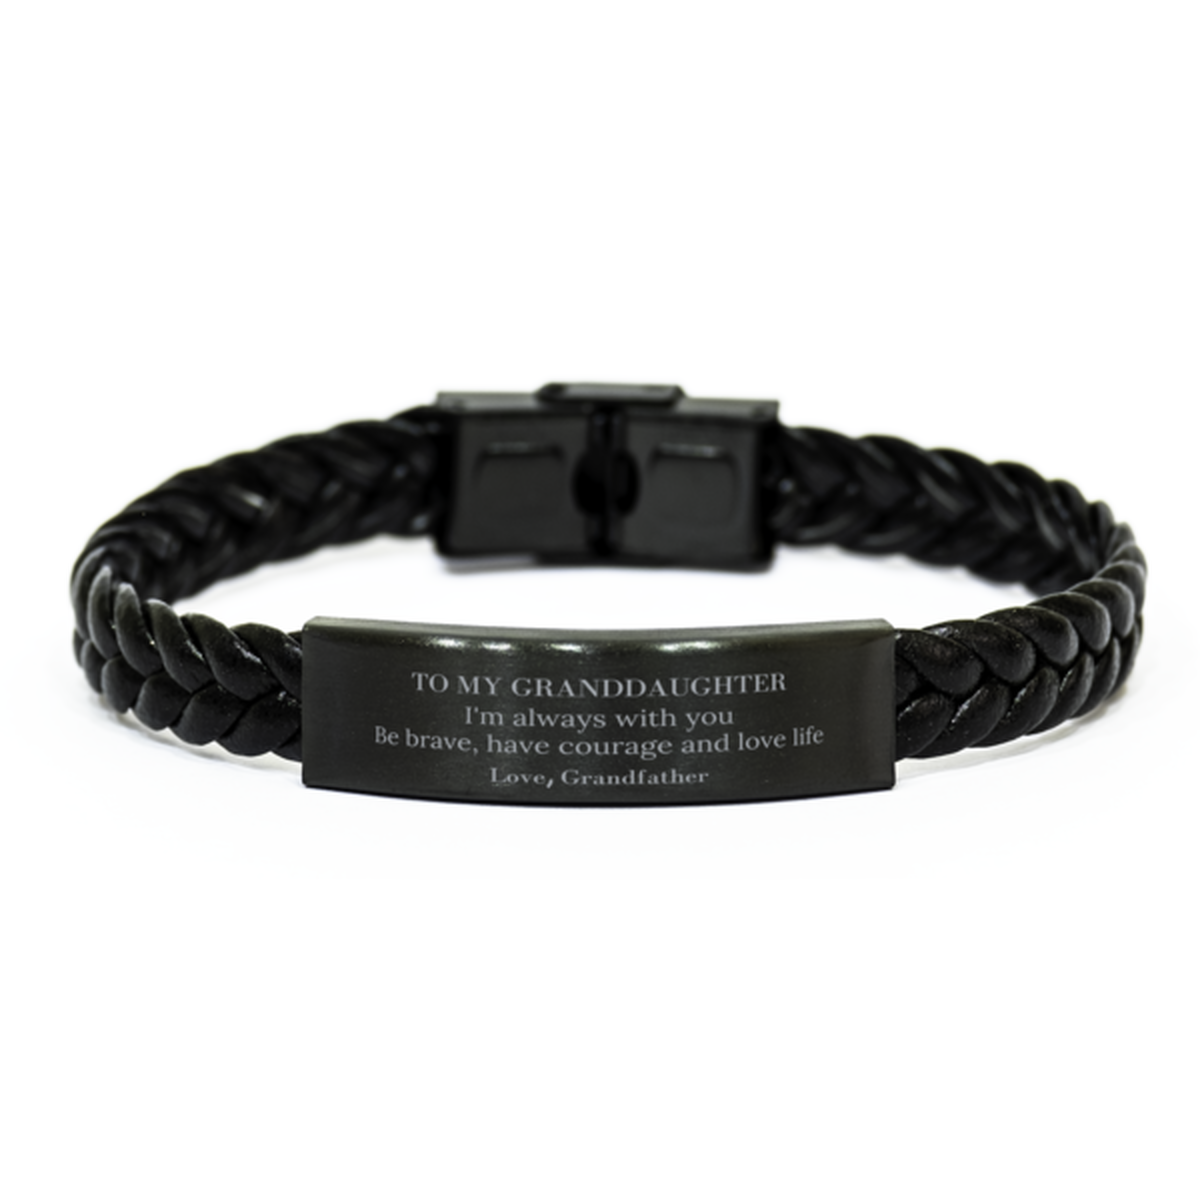 To My Granddaughter Gifts from Grandfather, Unique Braided Leather Bracelet Inspirational Christmas Birthday Graduation Gifts for Granddaughter I'm always with you. Be brave, have courage and love life. Love, Grandfather